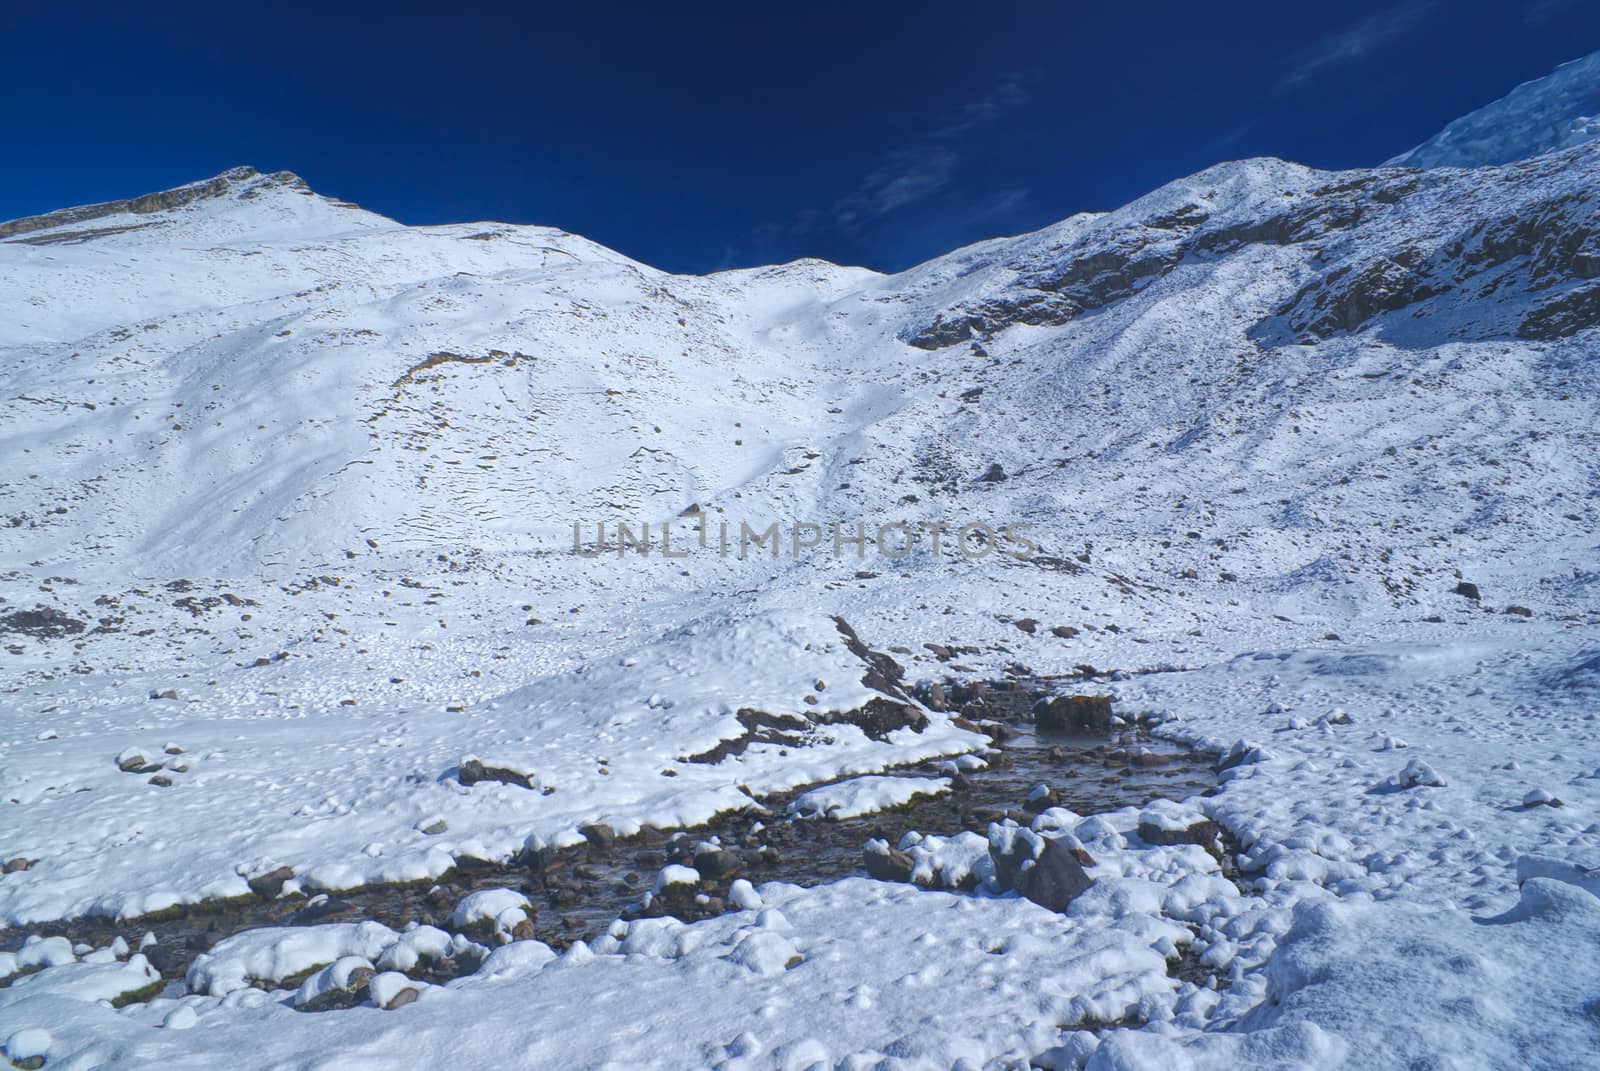 Picturesque view of Ausangate in high altitudes of south american Andes in Peru